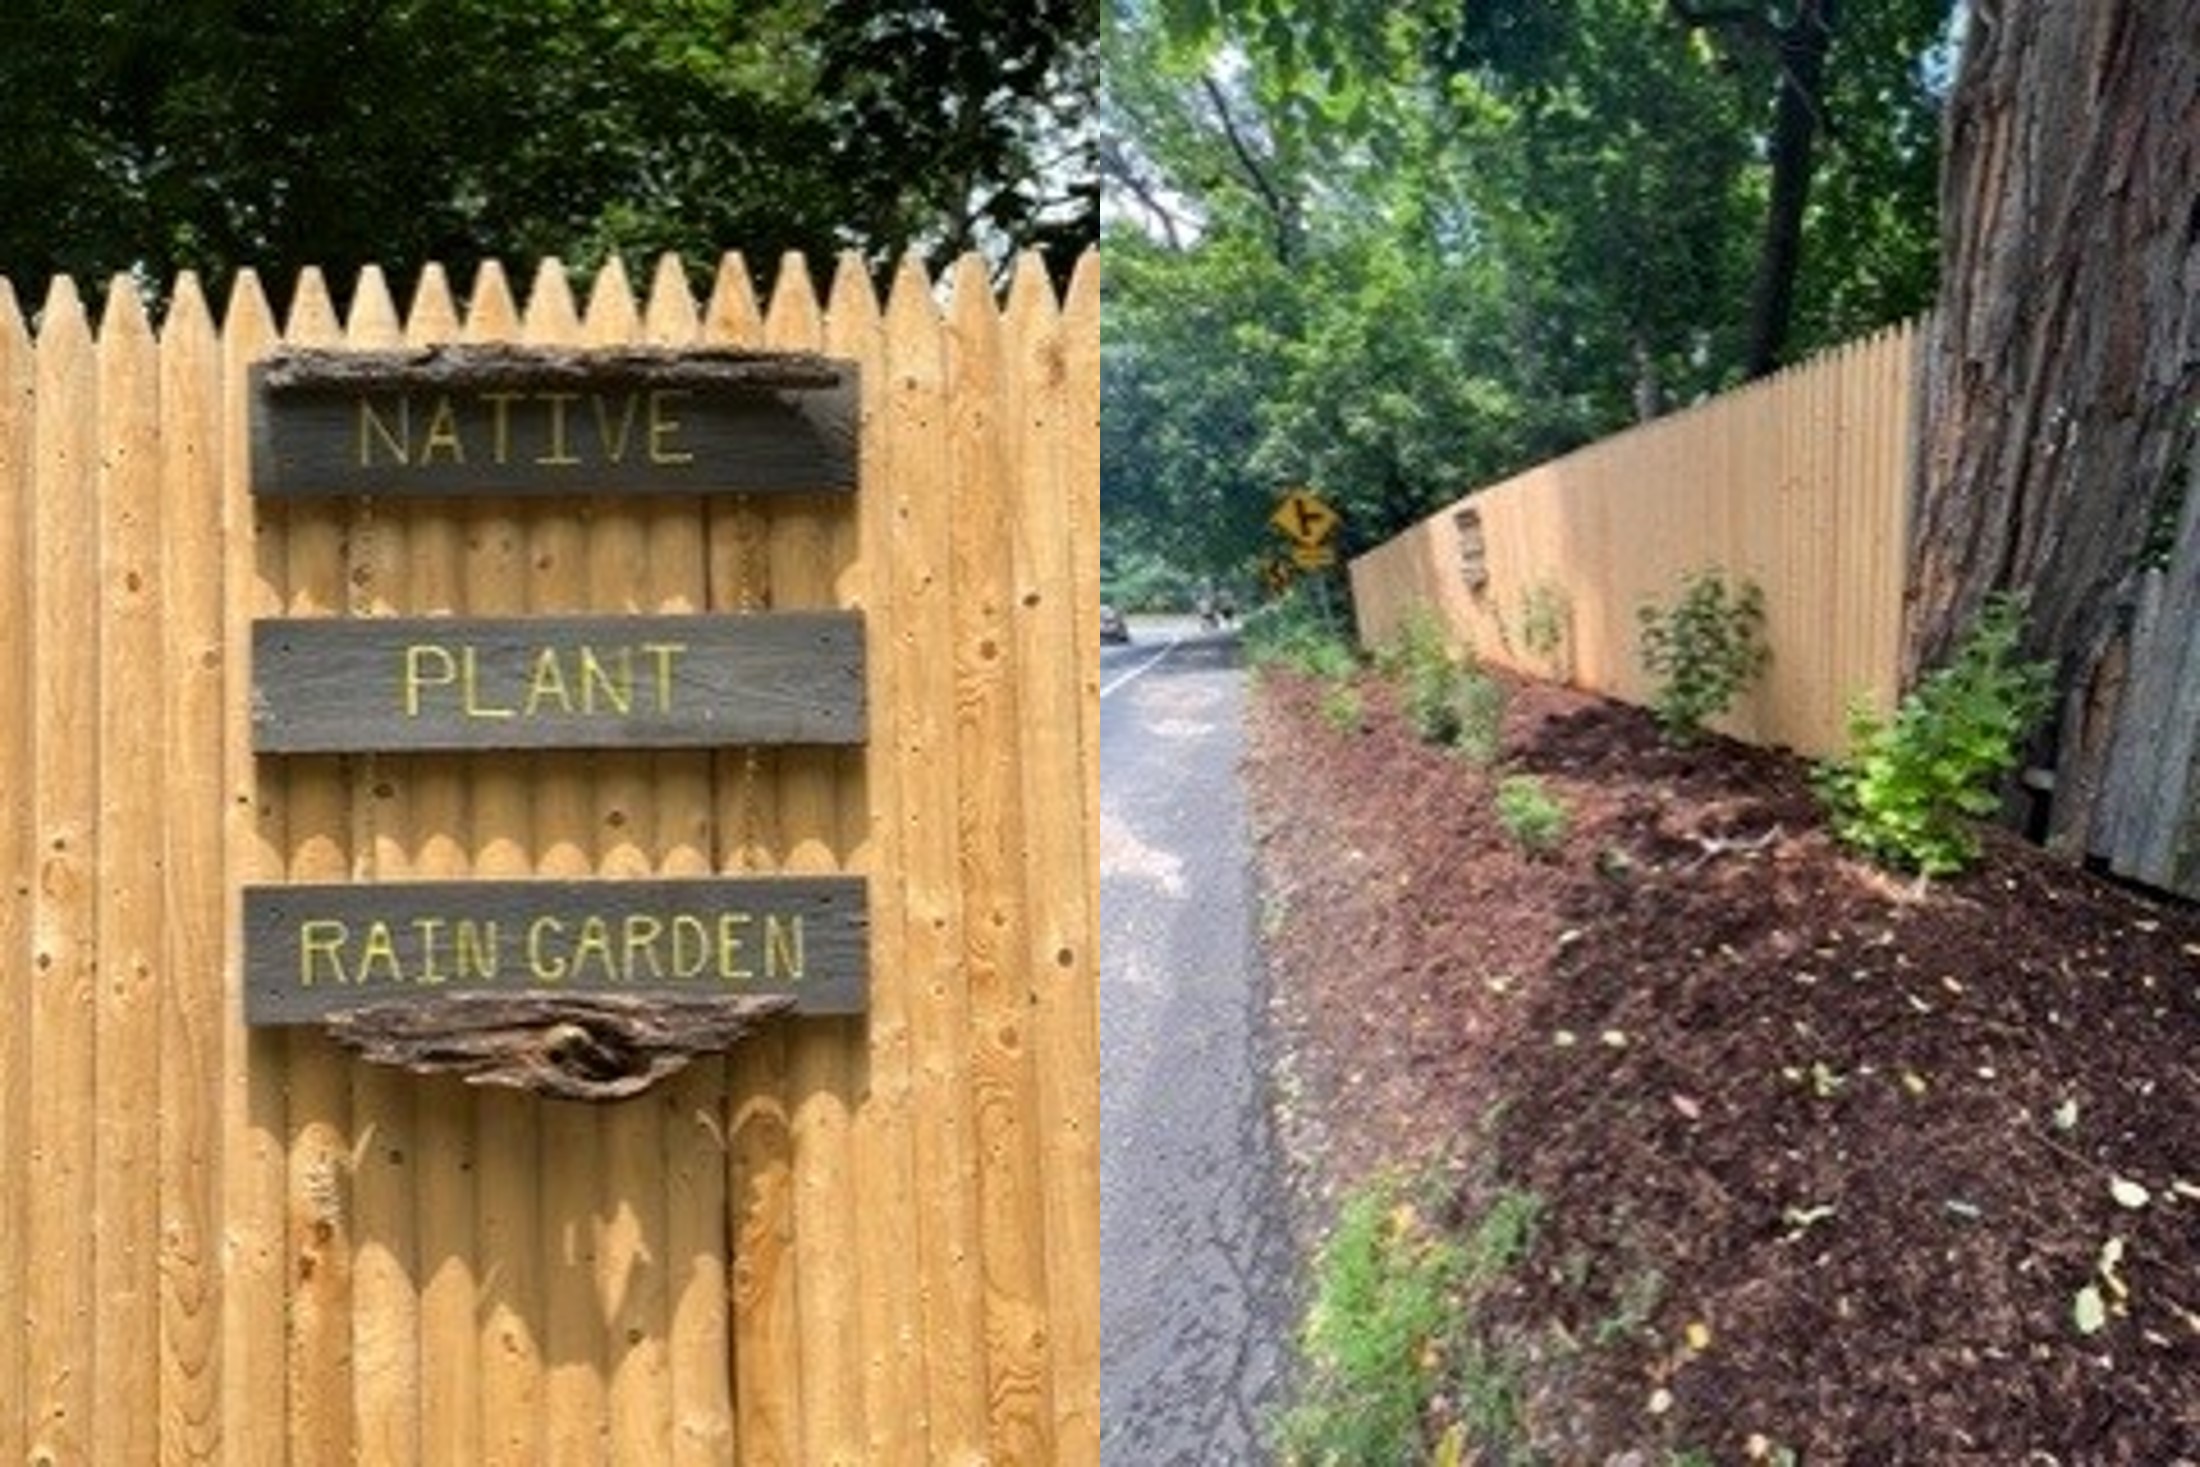 Two images. On the left, three darks igns against a wooden fence that read "Native Plant Rain Garden". On the right is a mulch garden with plants against the fence.